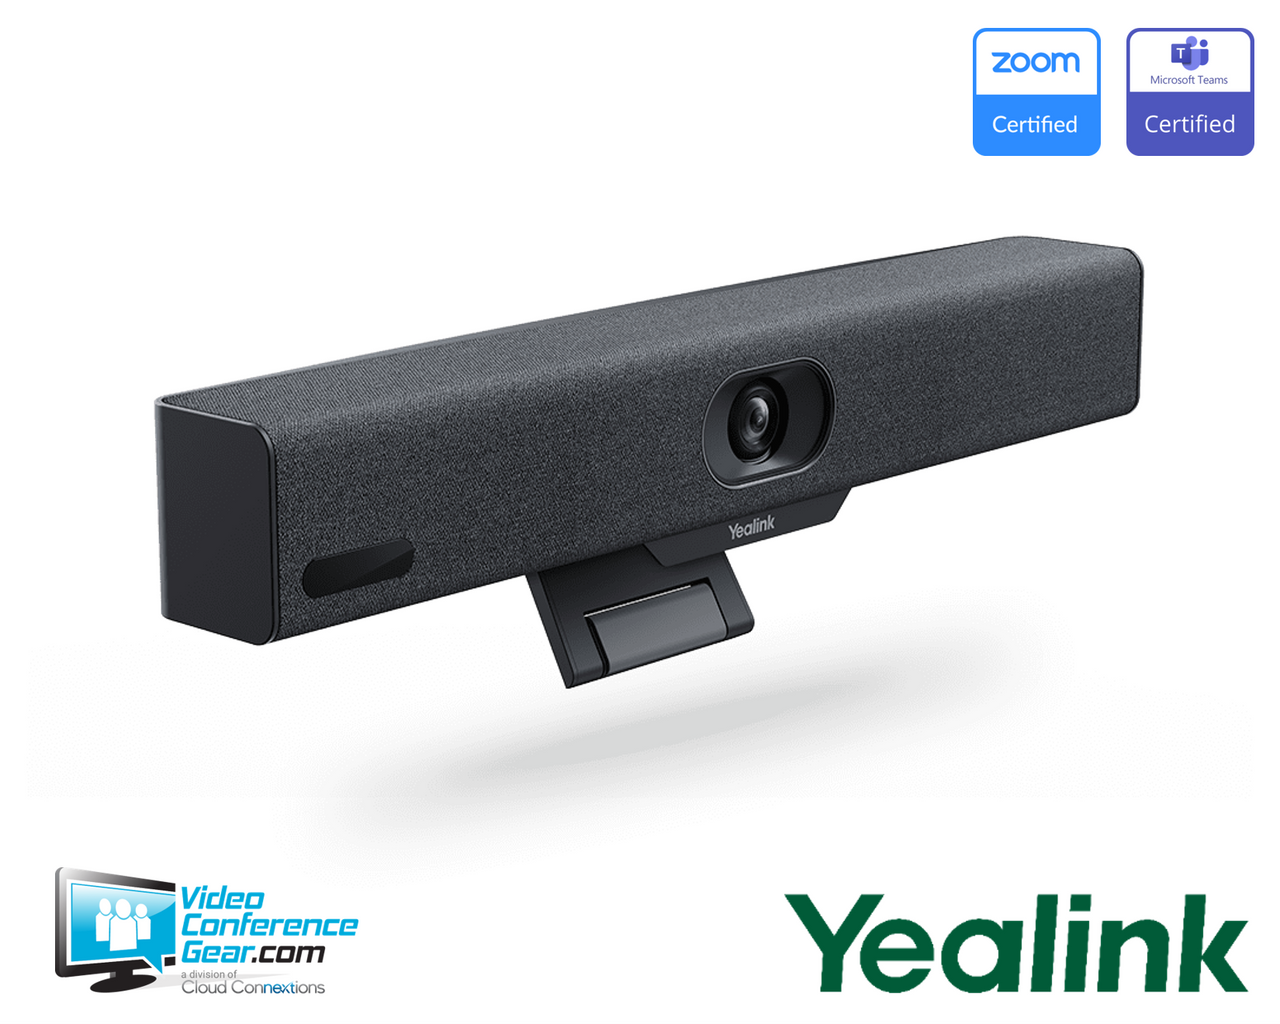 Yealink MeetingBar A10 All-in-One Android Videobar Ready for Teams or Zoom designed for Home Office or Small Rooms